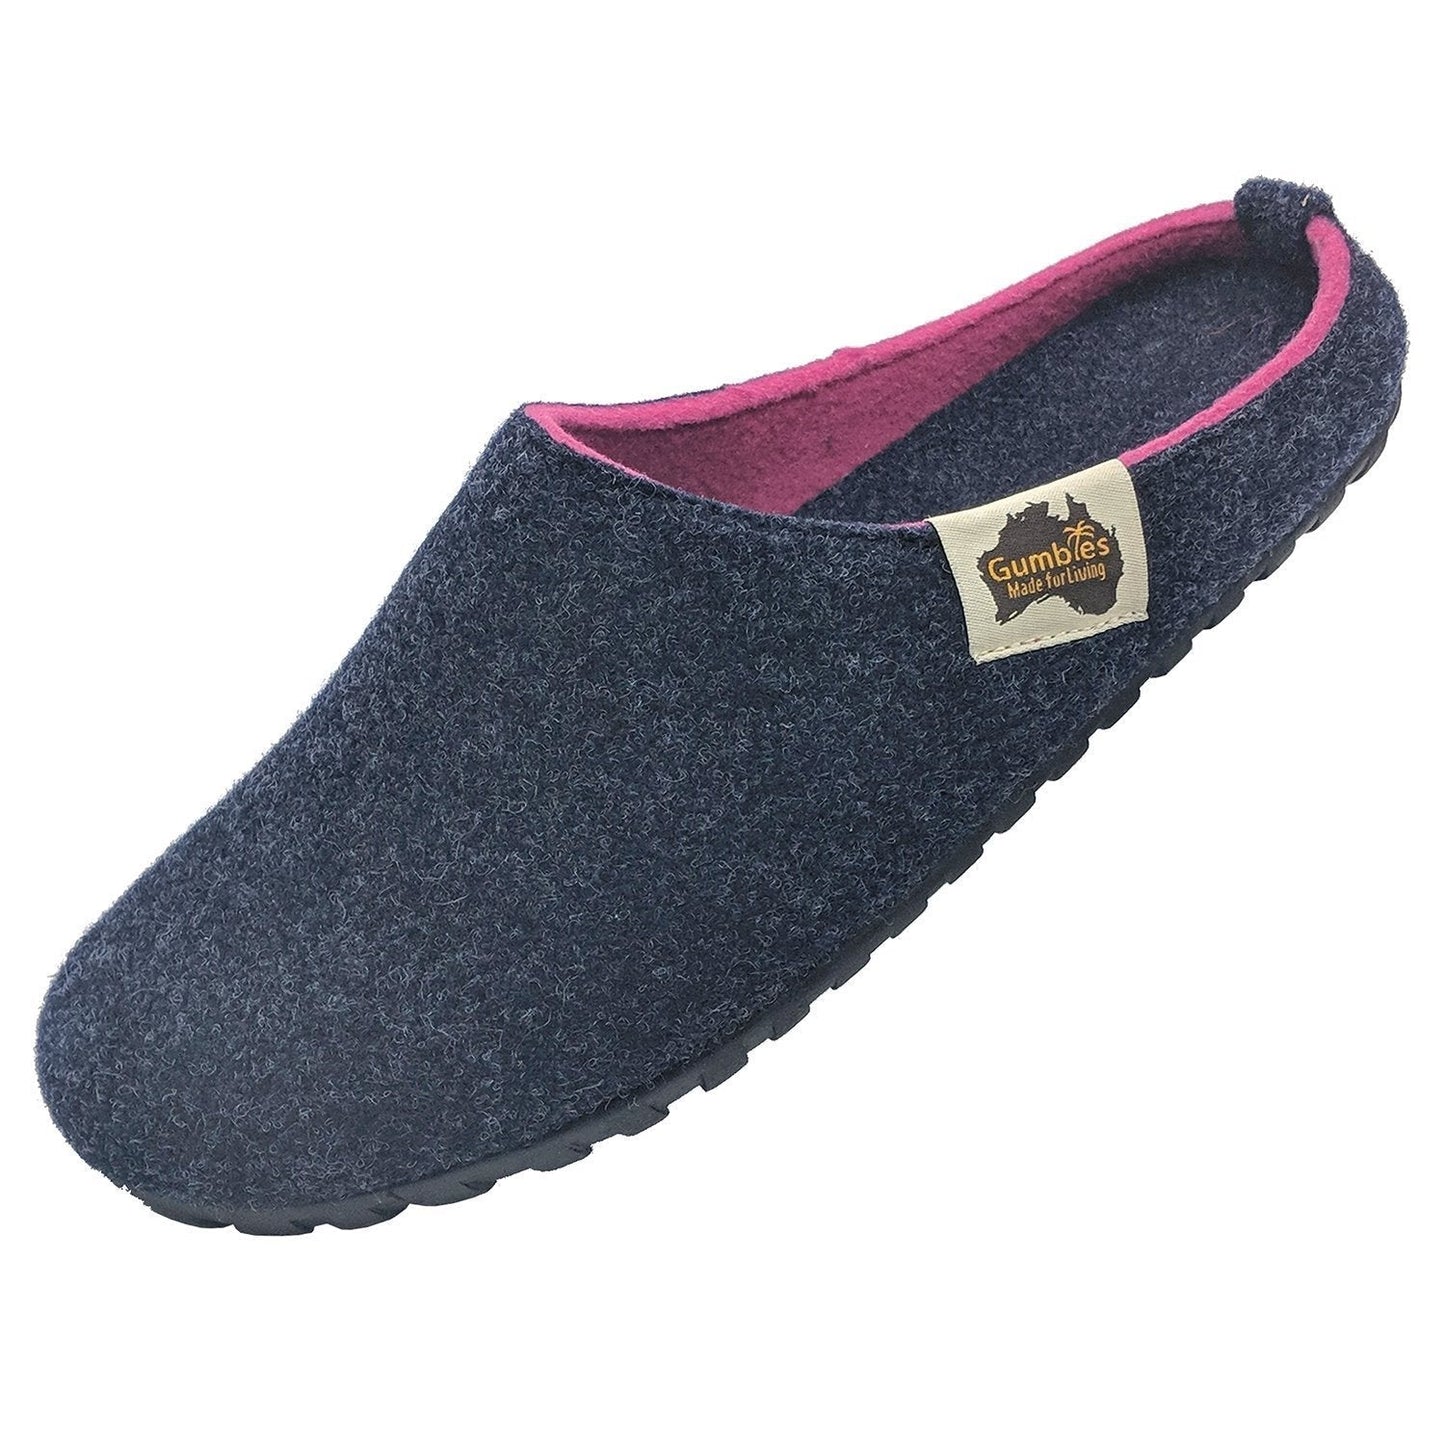 Outback Slipper - Navy & Pink